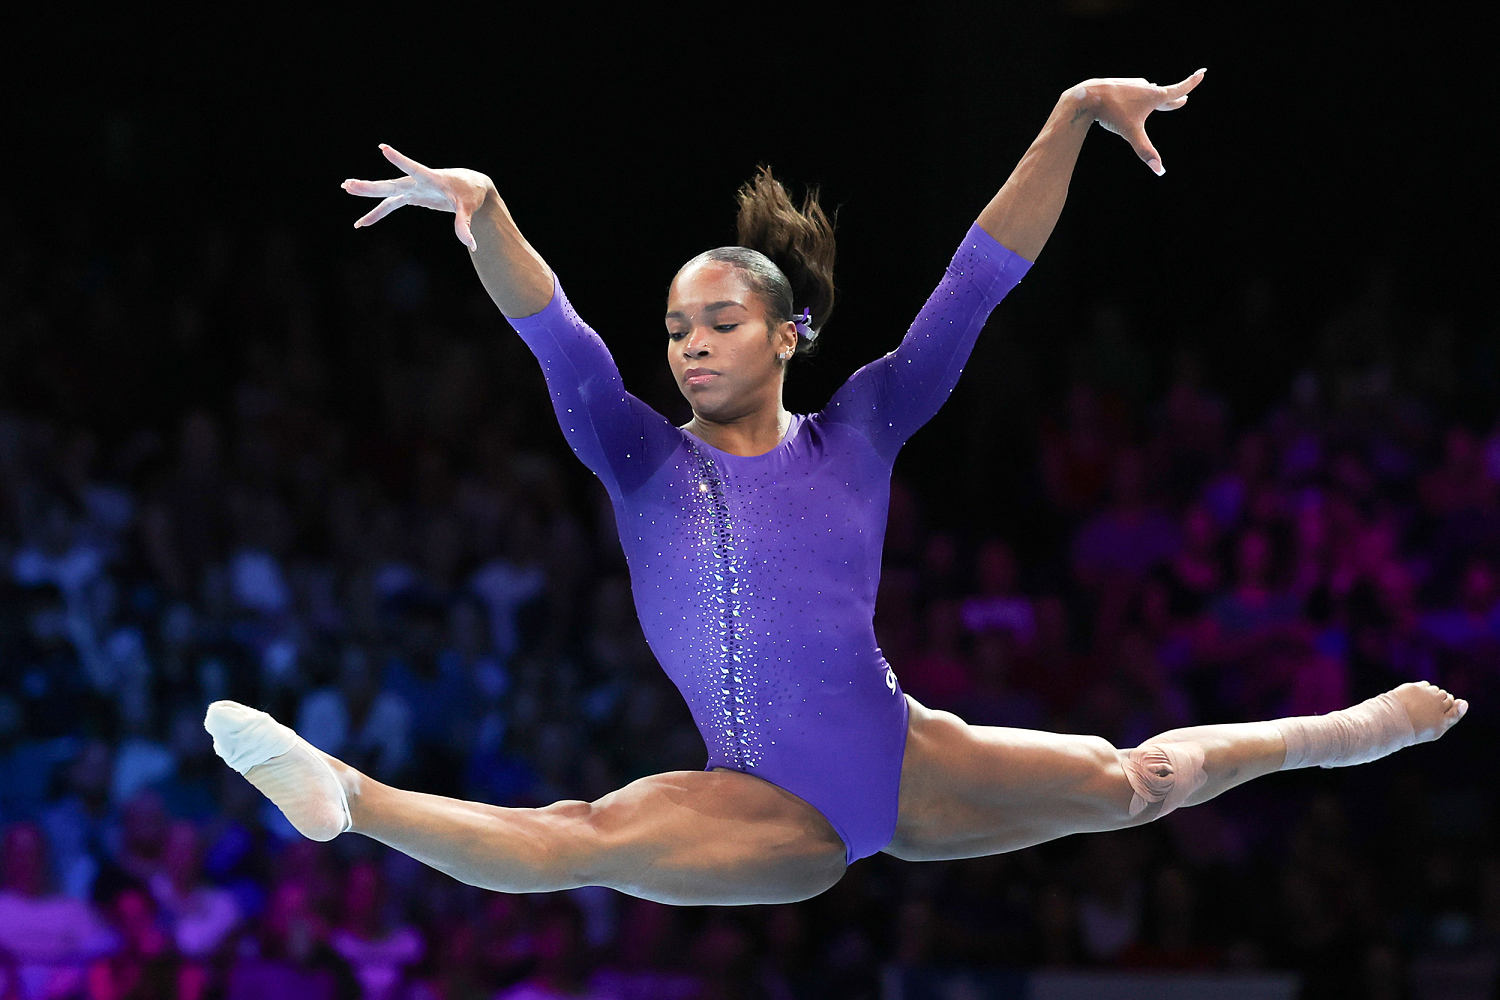 Top gymnast Shilese Jones pulls out of U.S. Championships and plans to petition to Olympic Trials